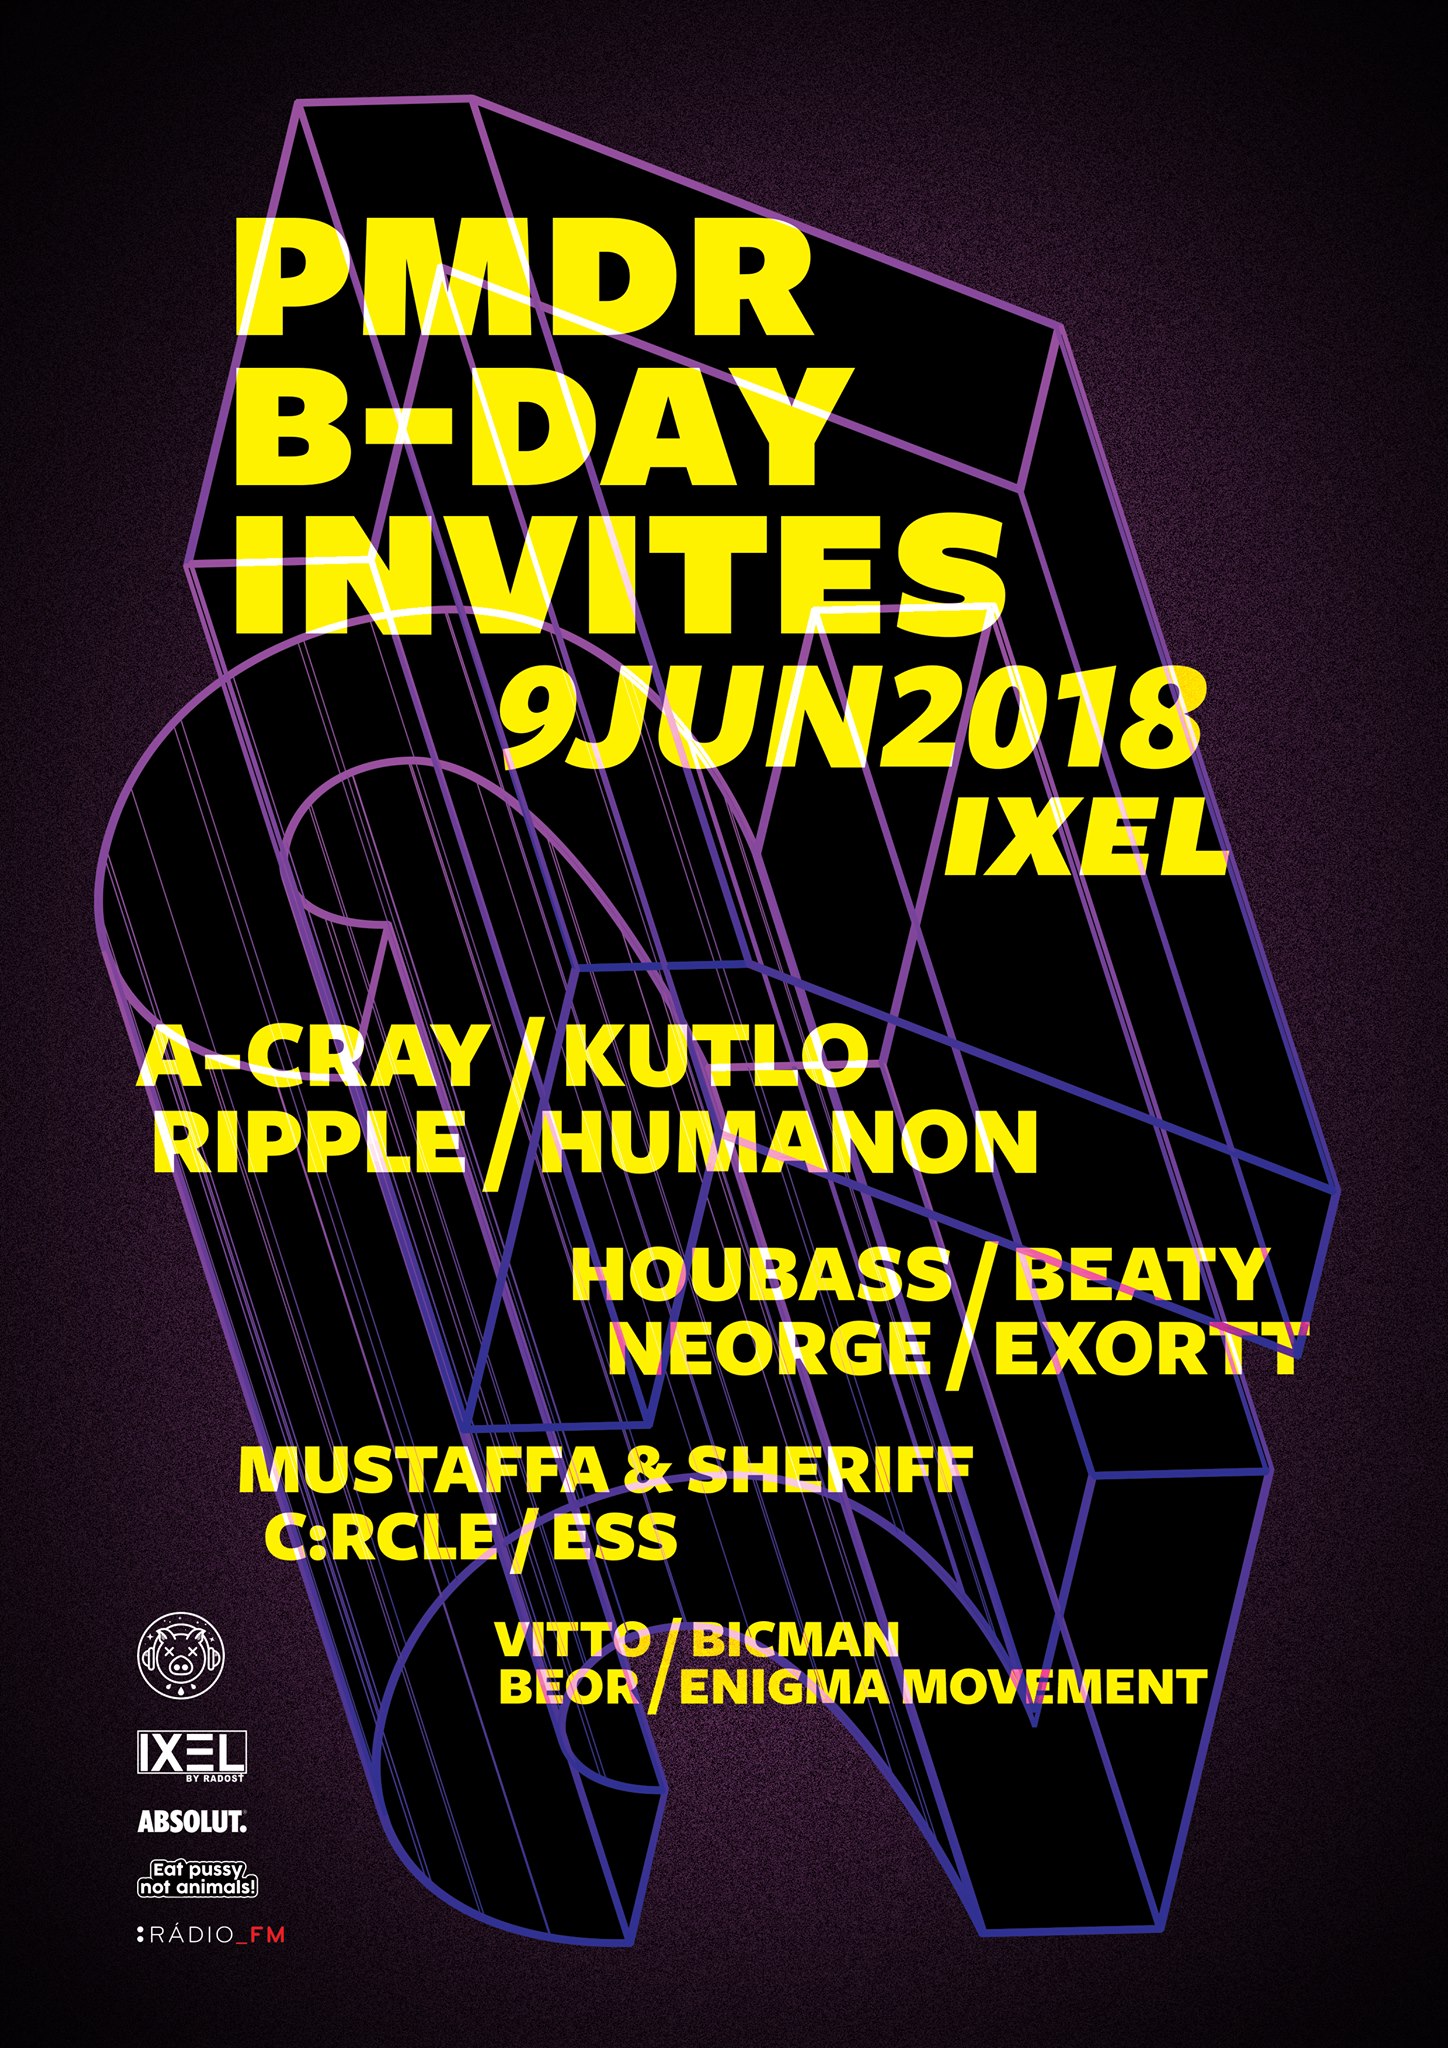 PmdR B-Day Invites with A-Cray, Kutlo, Ripple & many more